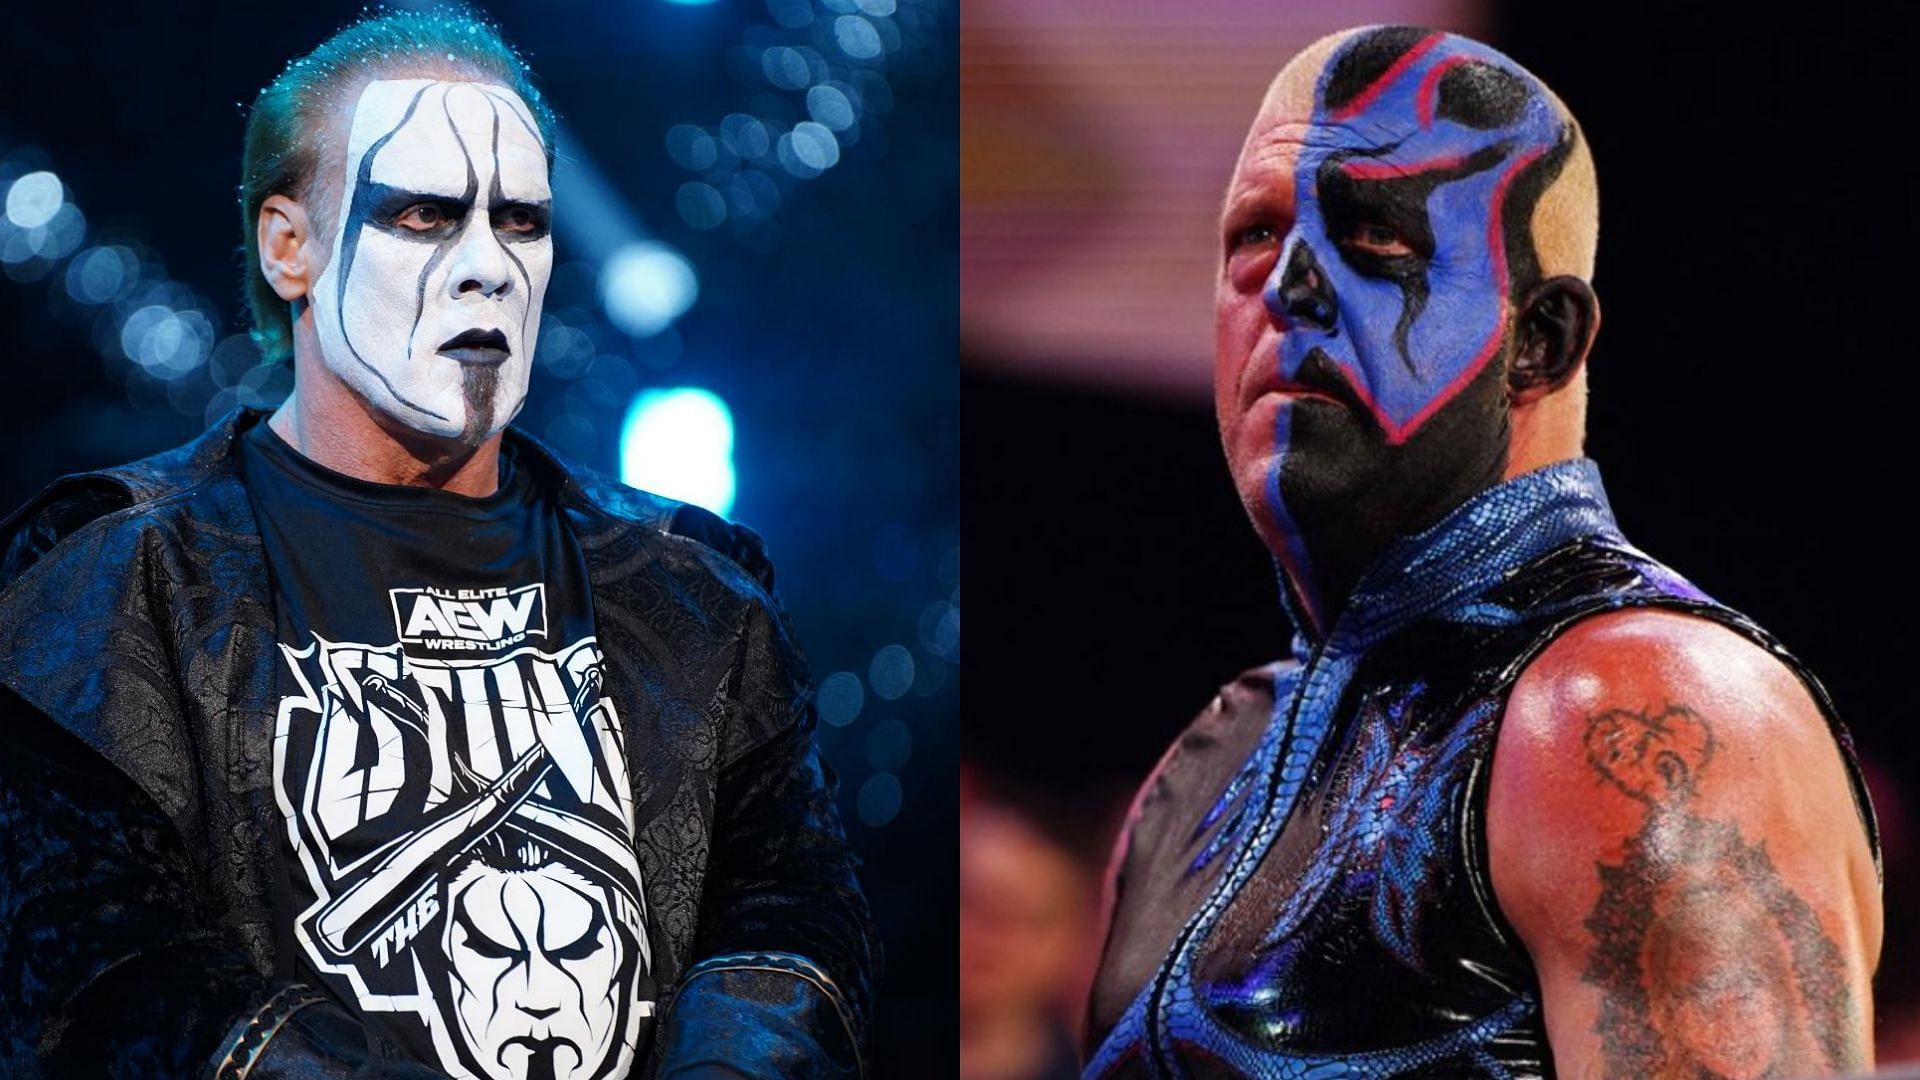 Sting and Dustin Rhodes are veterans in AEW